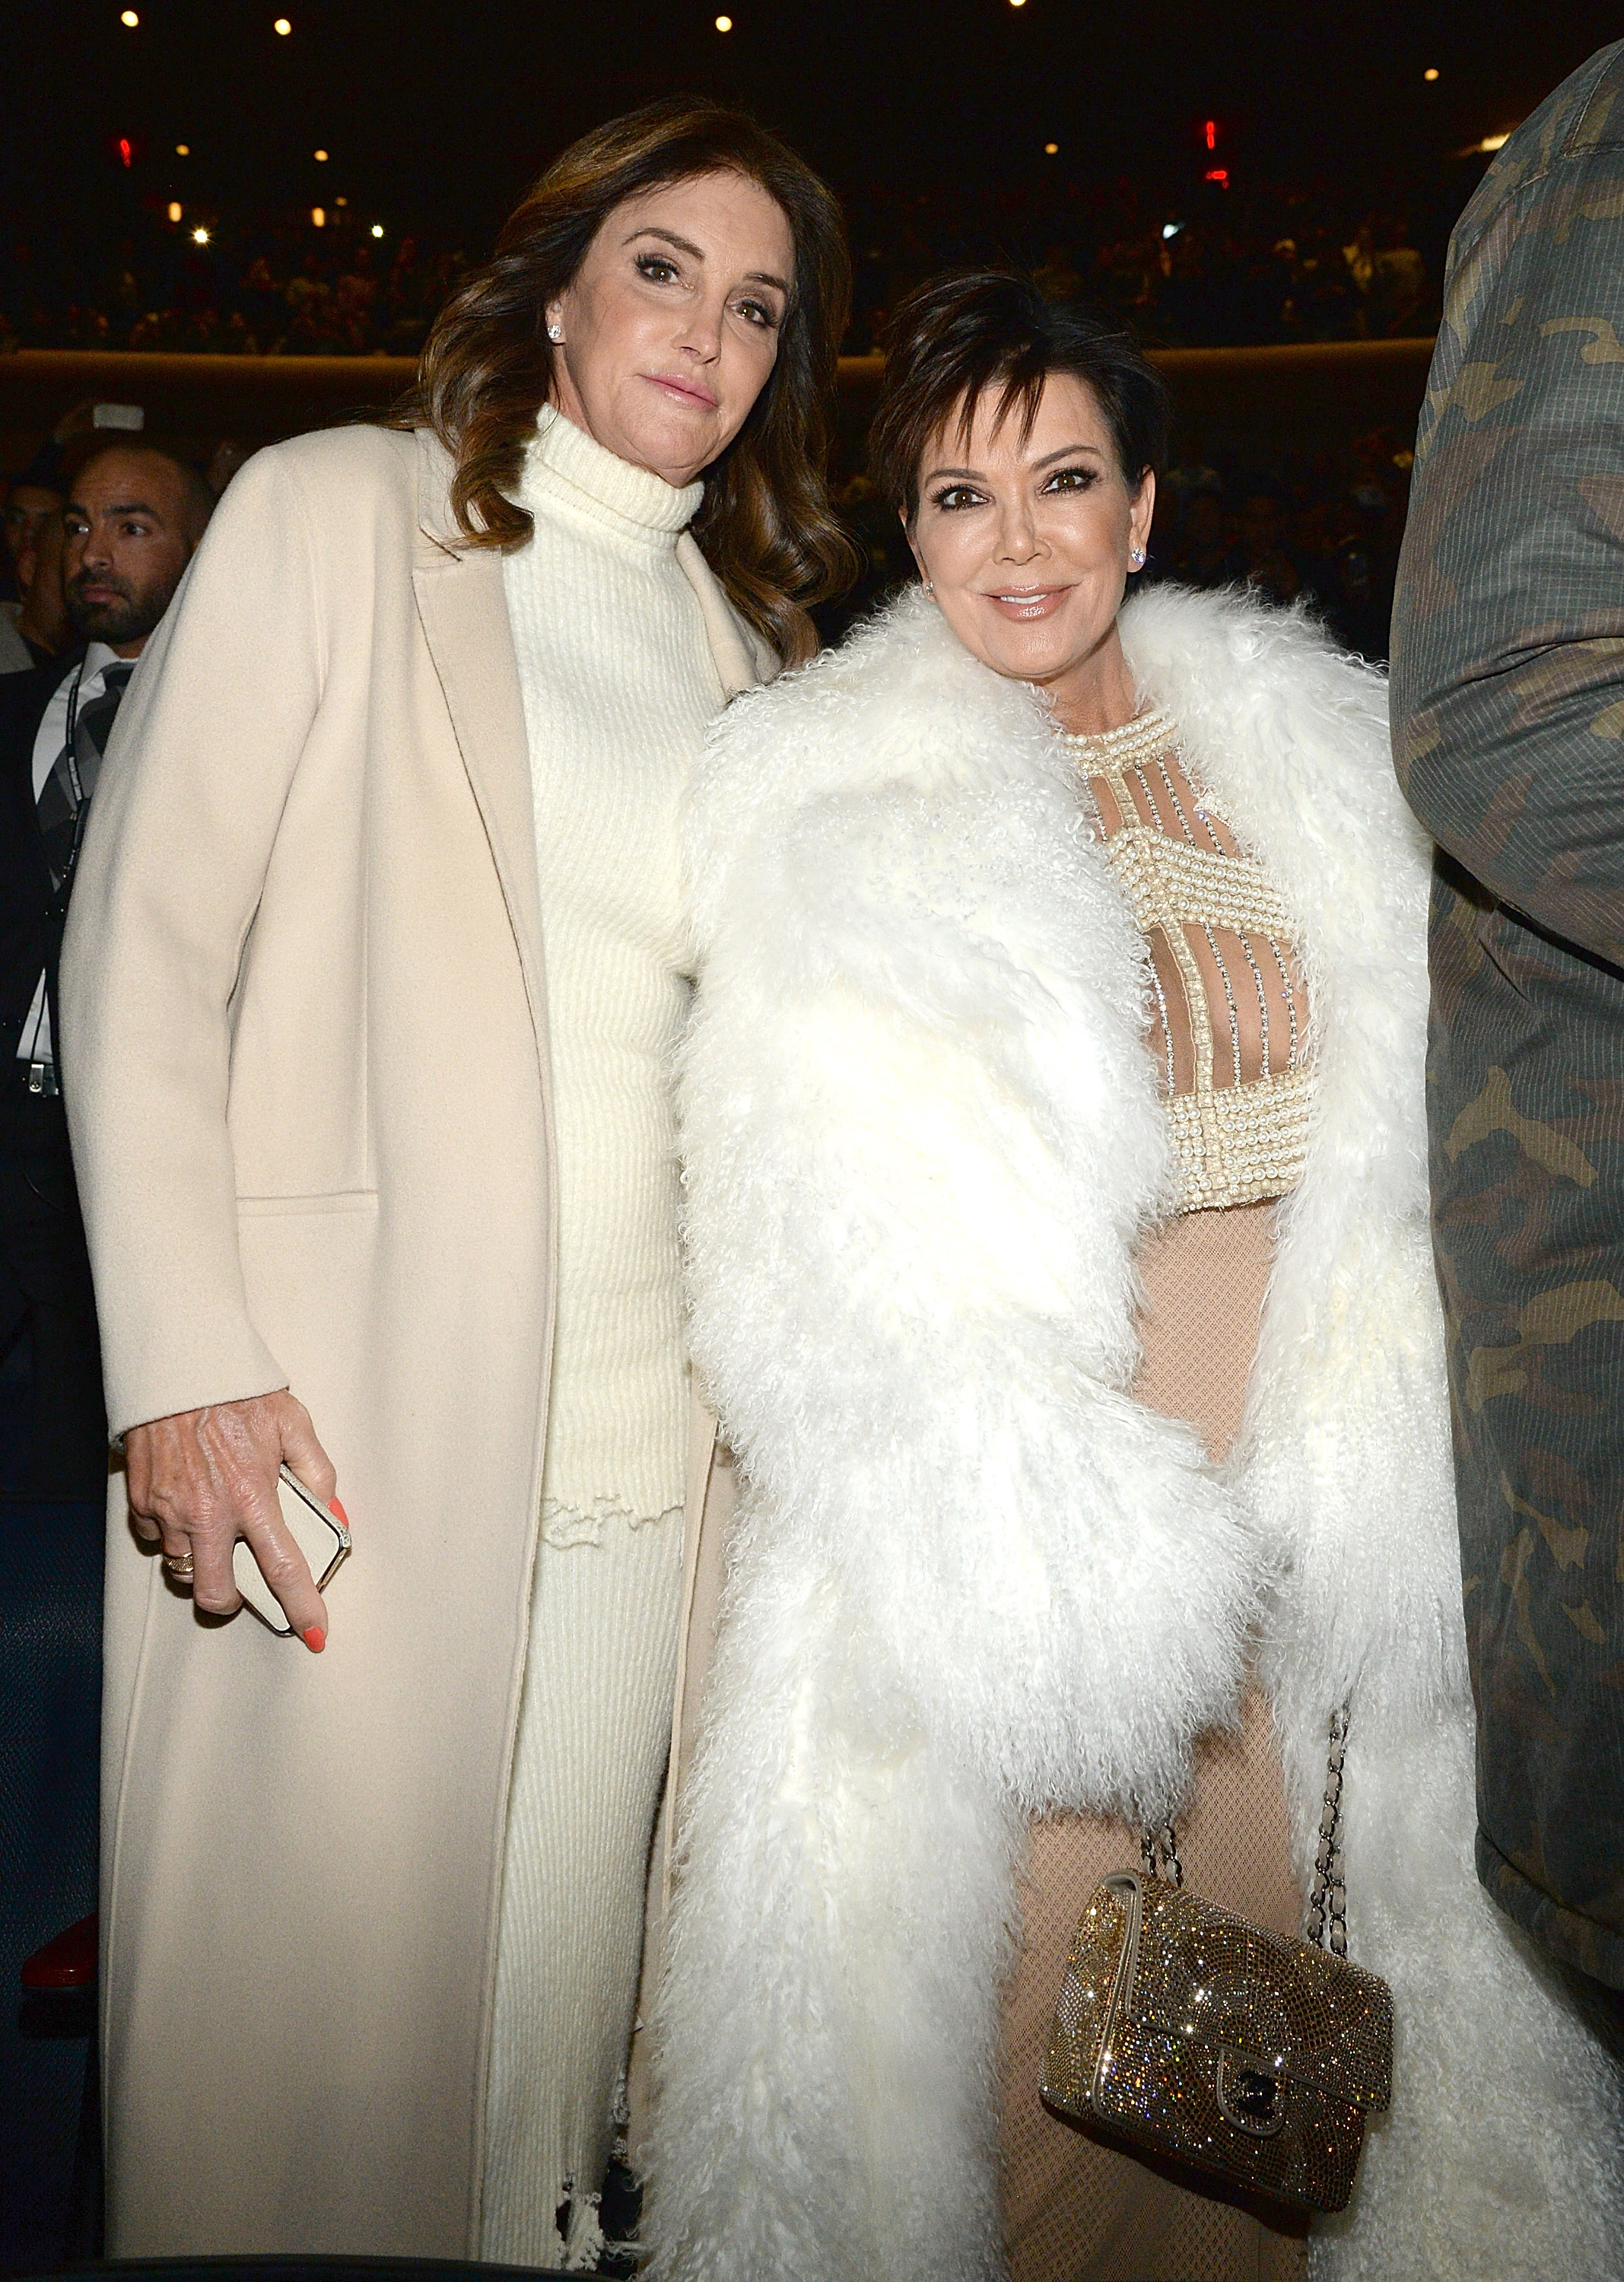 Caitlyn Jenner and Kris Jenner attend Kanye West Yeezy Season 3 in New York City on February 11, 2016 | Source: Getty Images